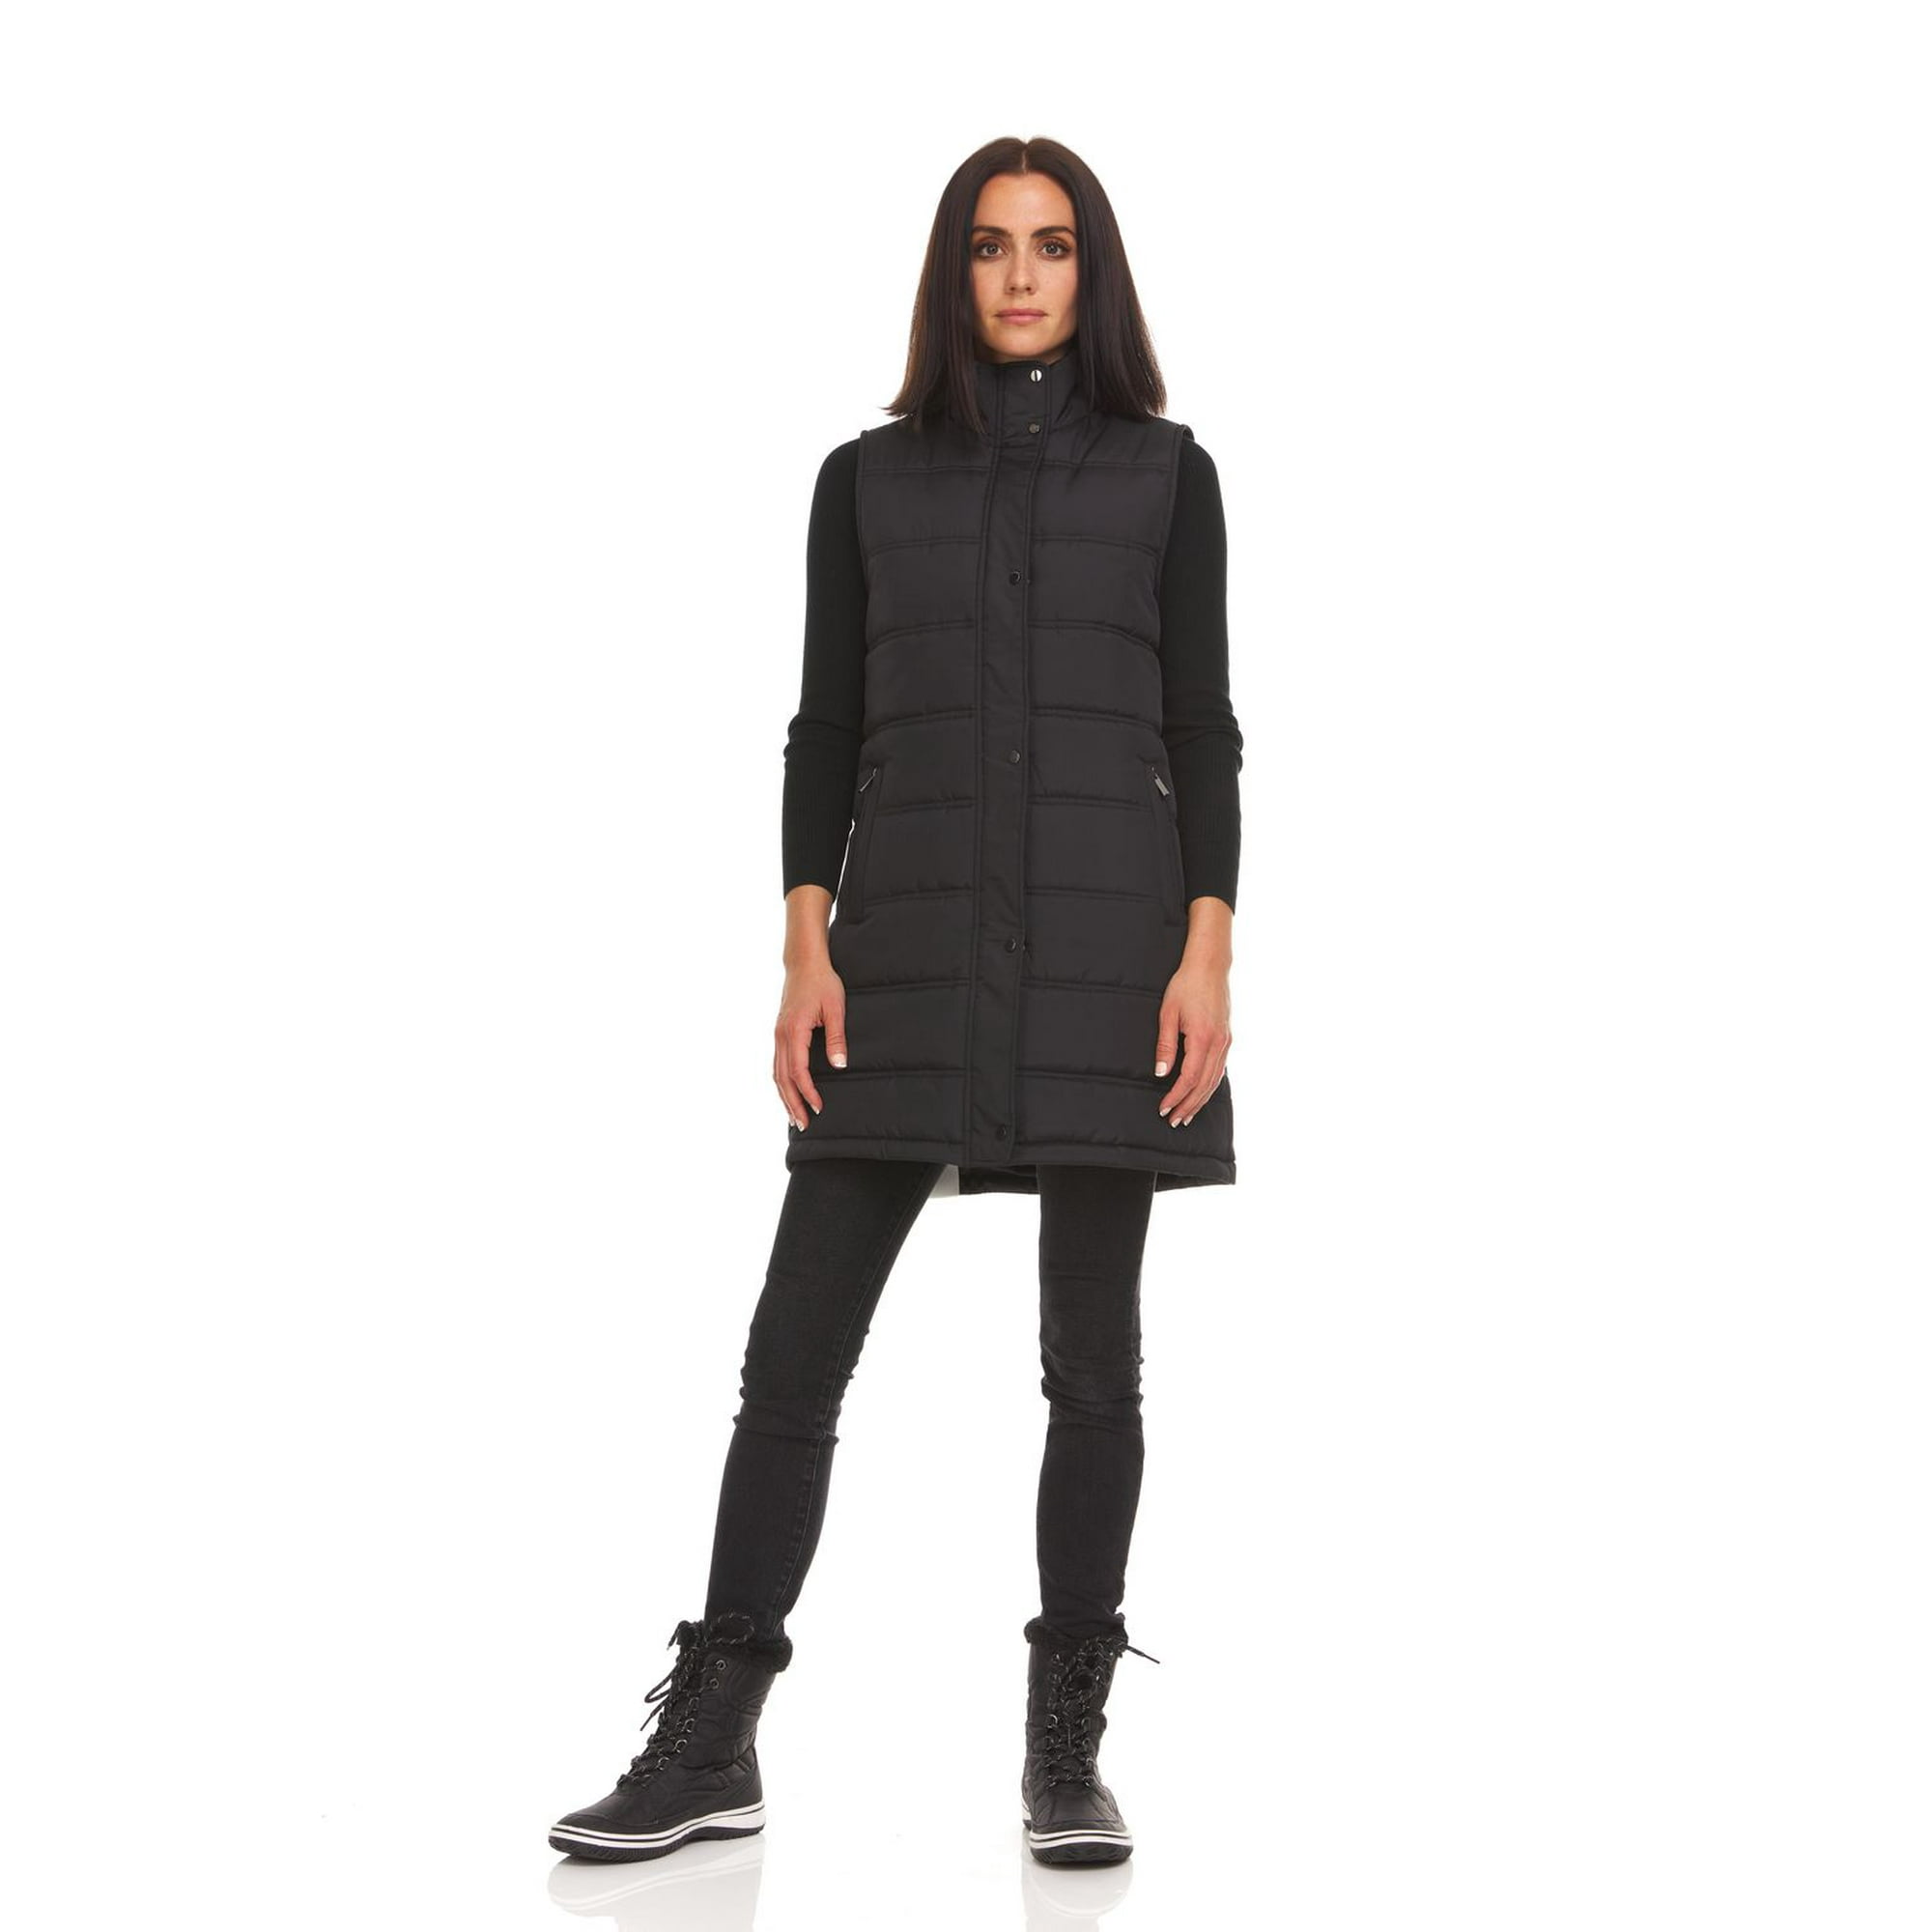 Swiss Tech Hooded Vest with Cinched Waist, Terra & Sky Long Sleeve T-Shirt,  Time and Tru Faux Leather Leggings and Chelsea Boots - Walmart Finds